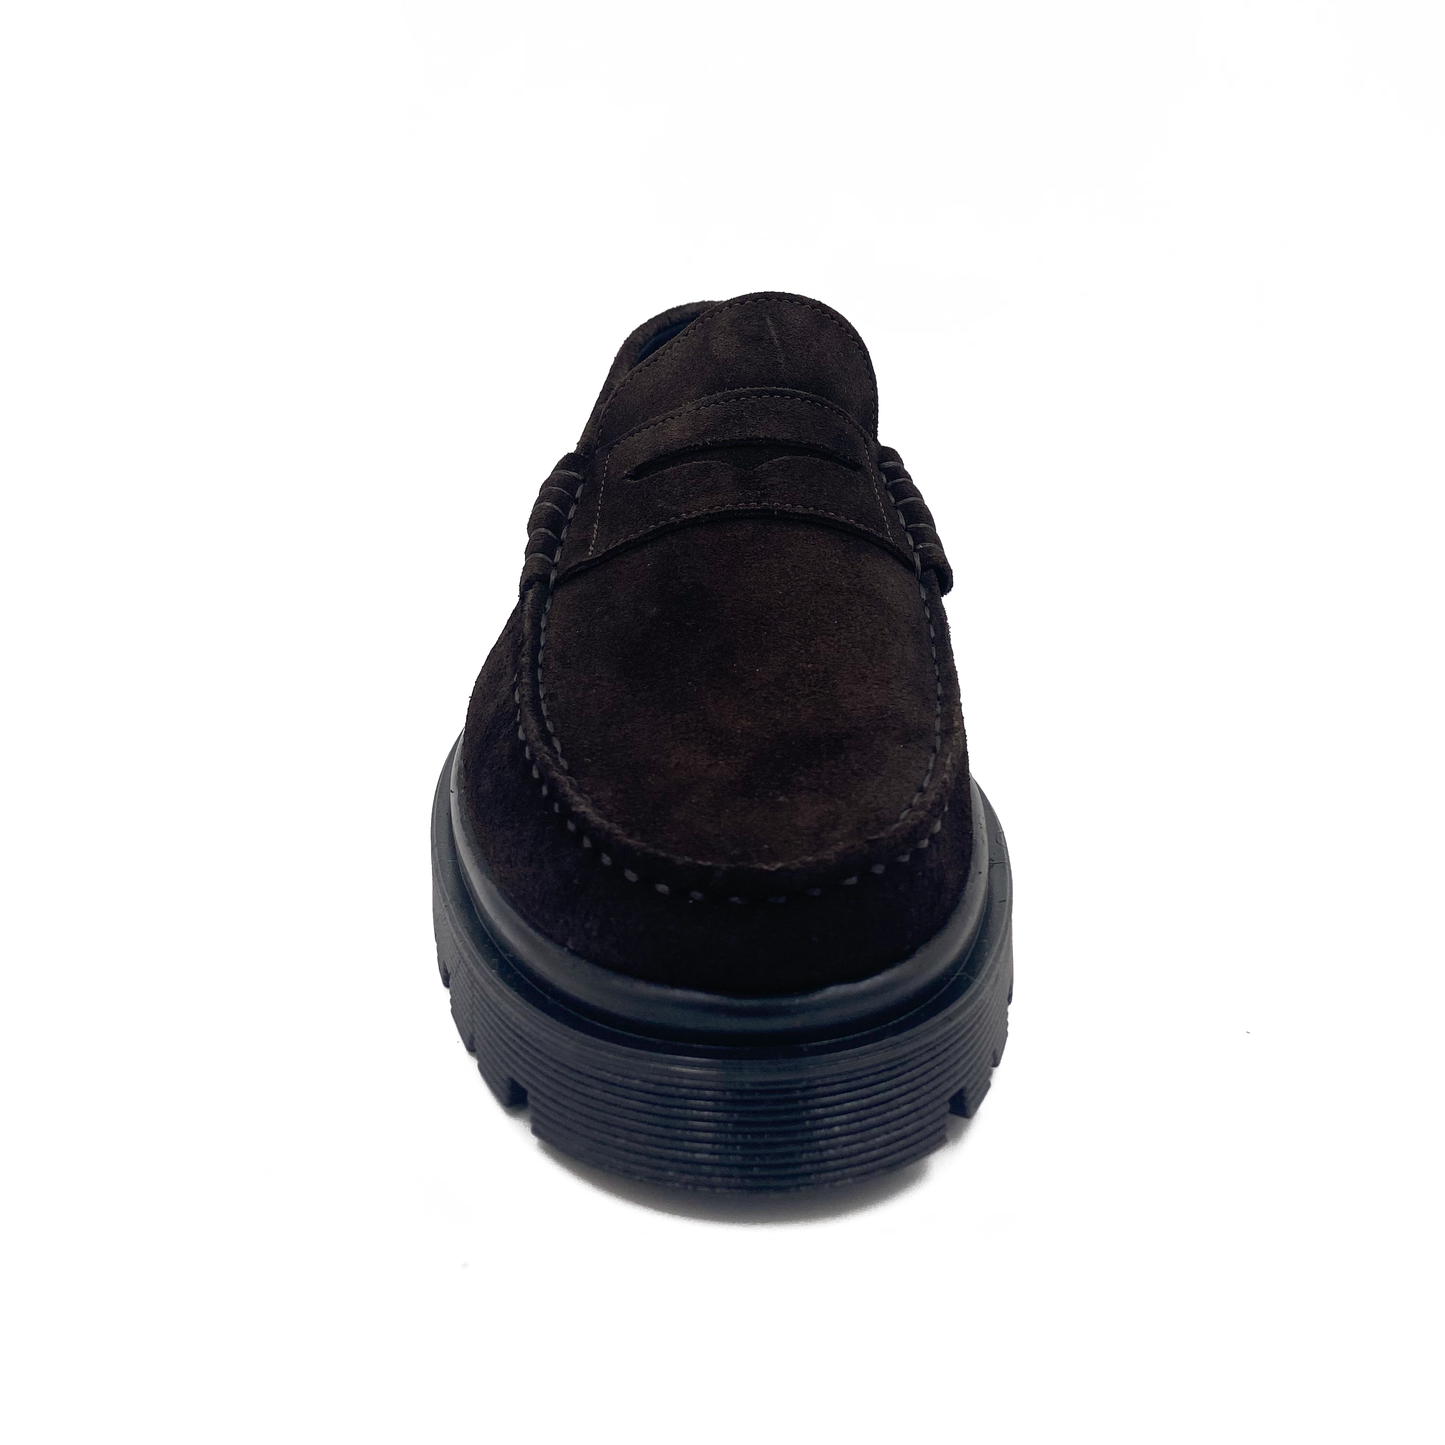 Playboy loafer Brown Suede